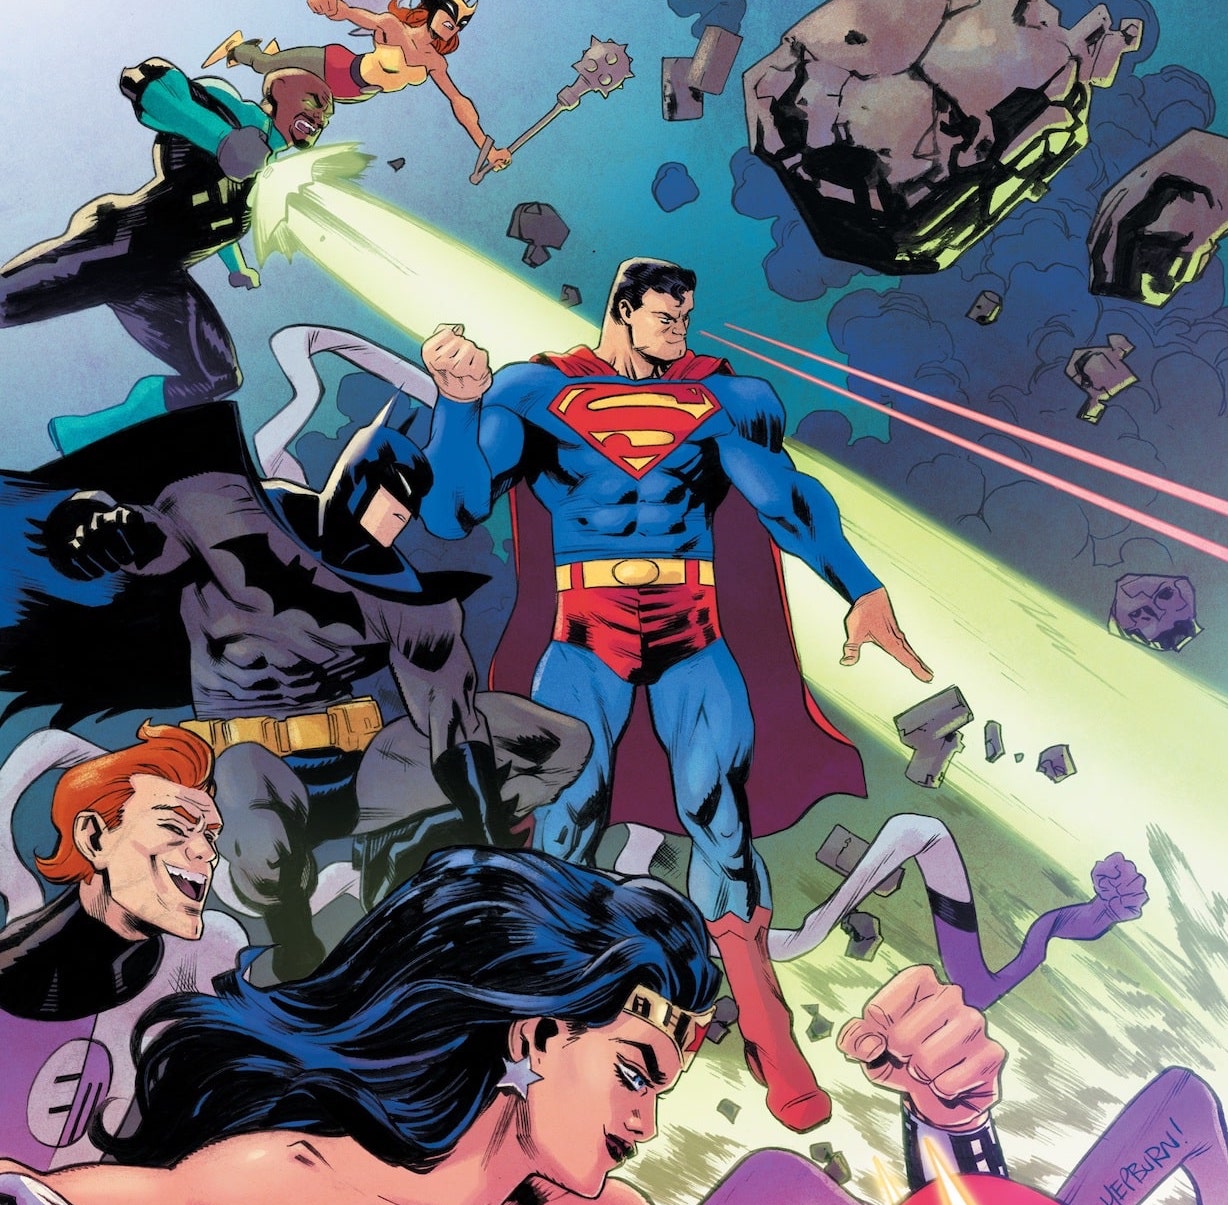 DC First Look: 'Justice League Infinity' #1 set within 'Justice League Unlimited'